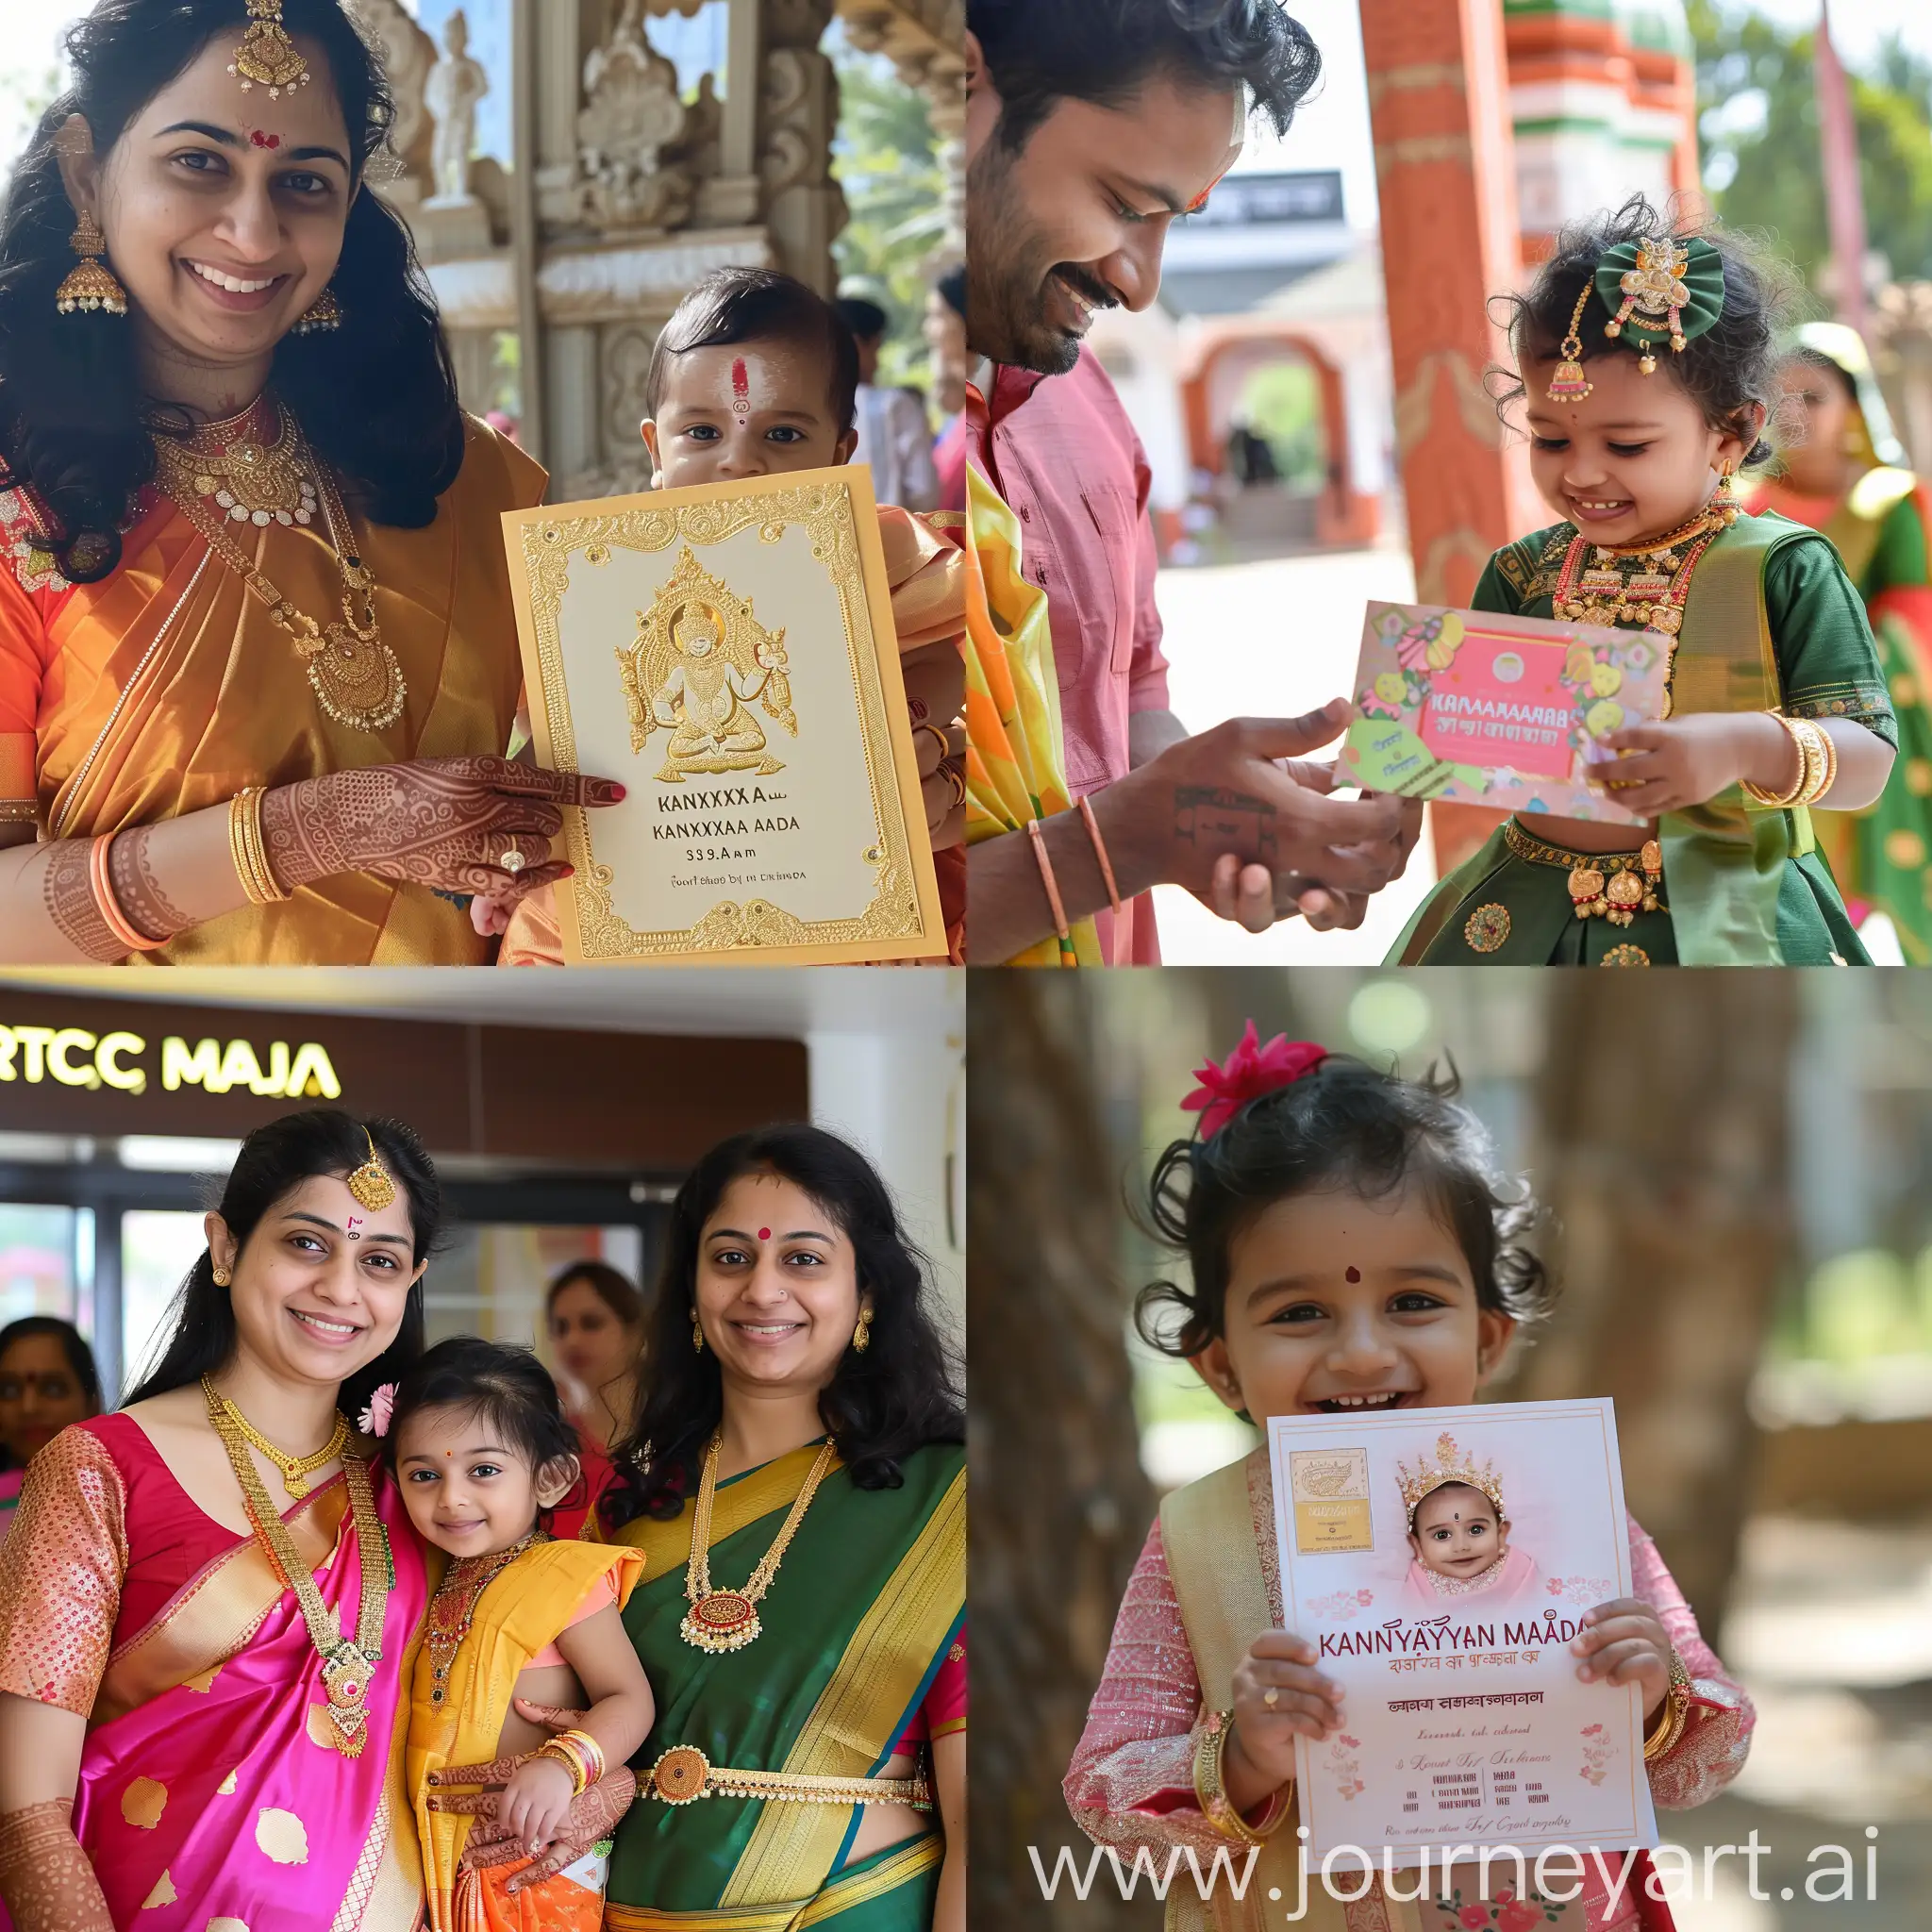 Create an invitation for baby naming ceremony in kannada event date on 3rd of march which is sunday time 10.00am and venue of event is kanyaka mahal, near rtc bustand, chintamani